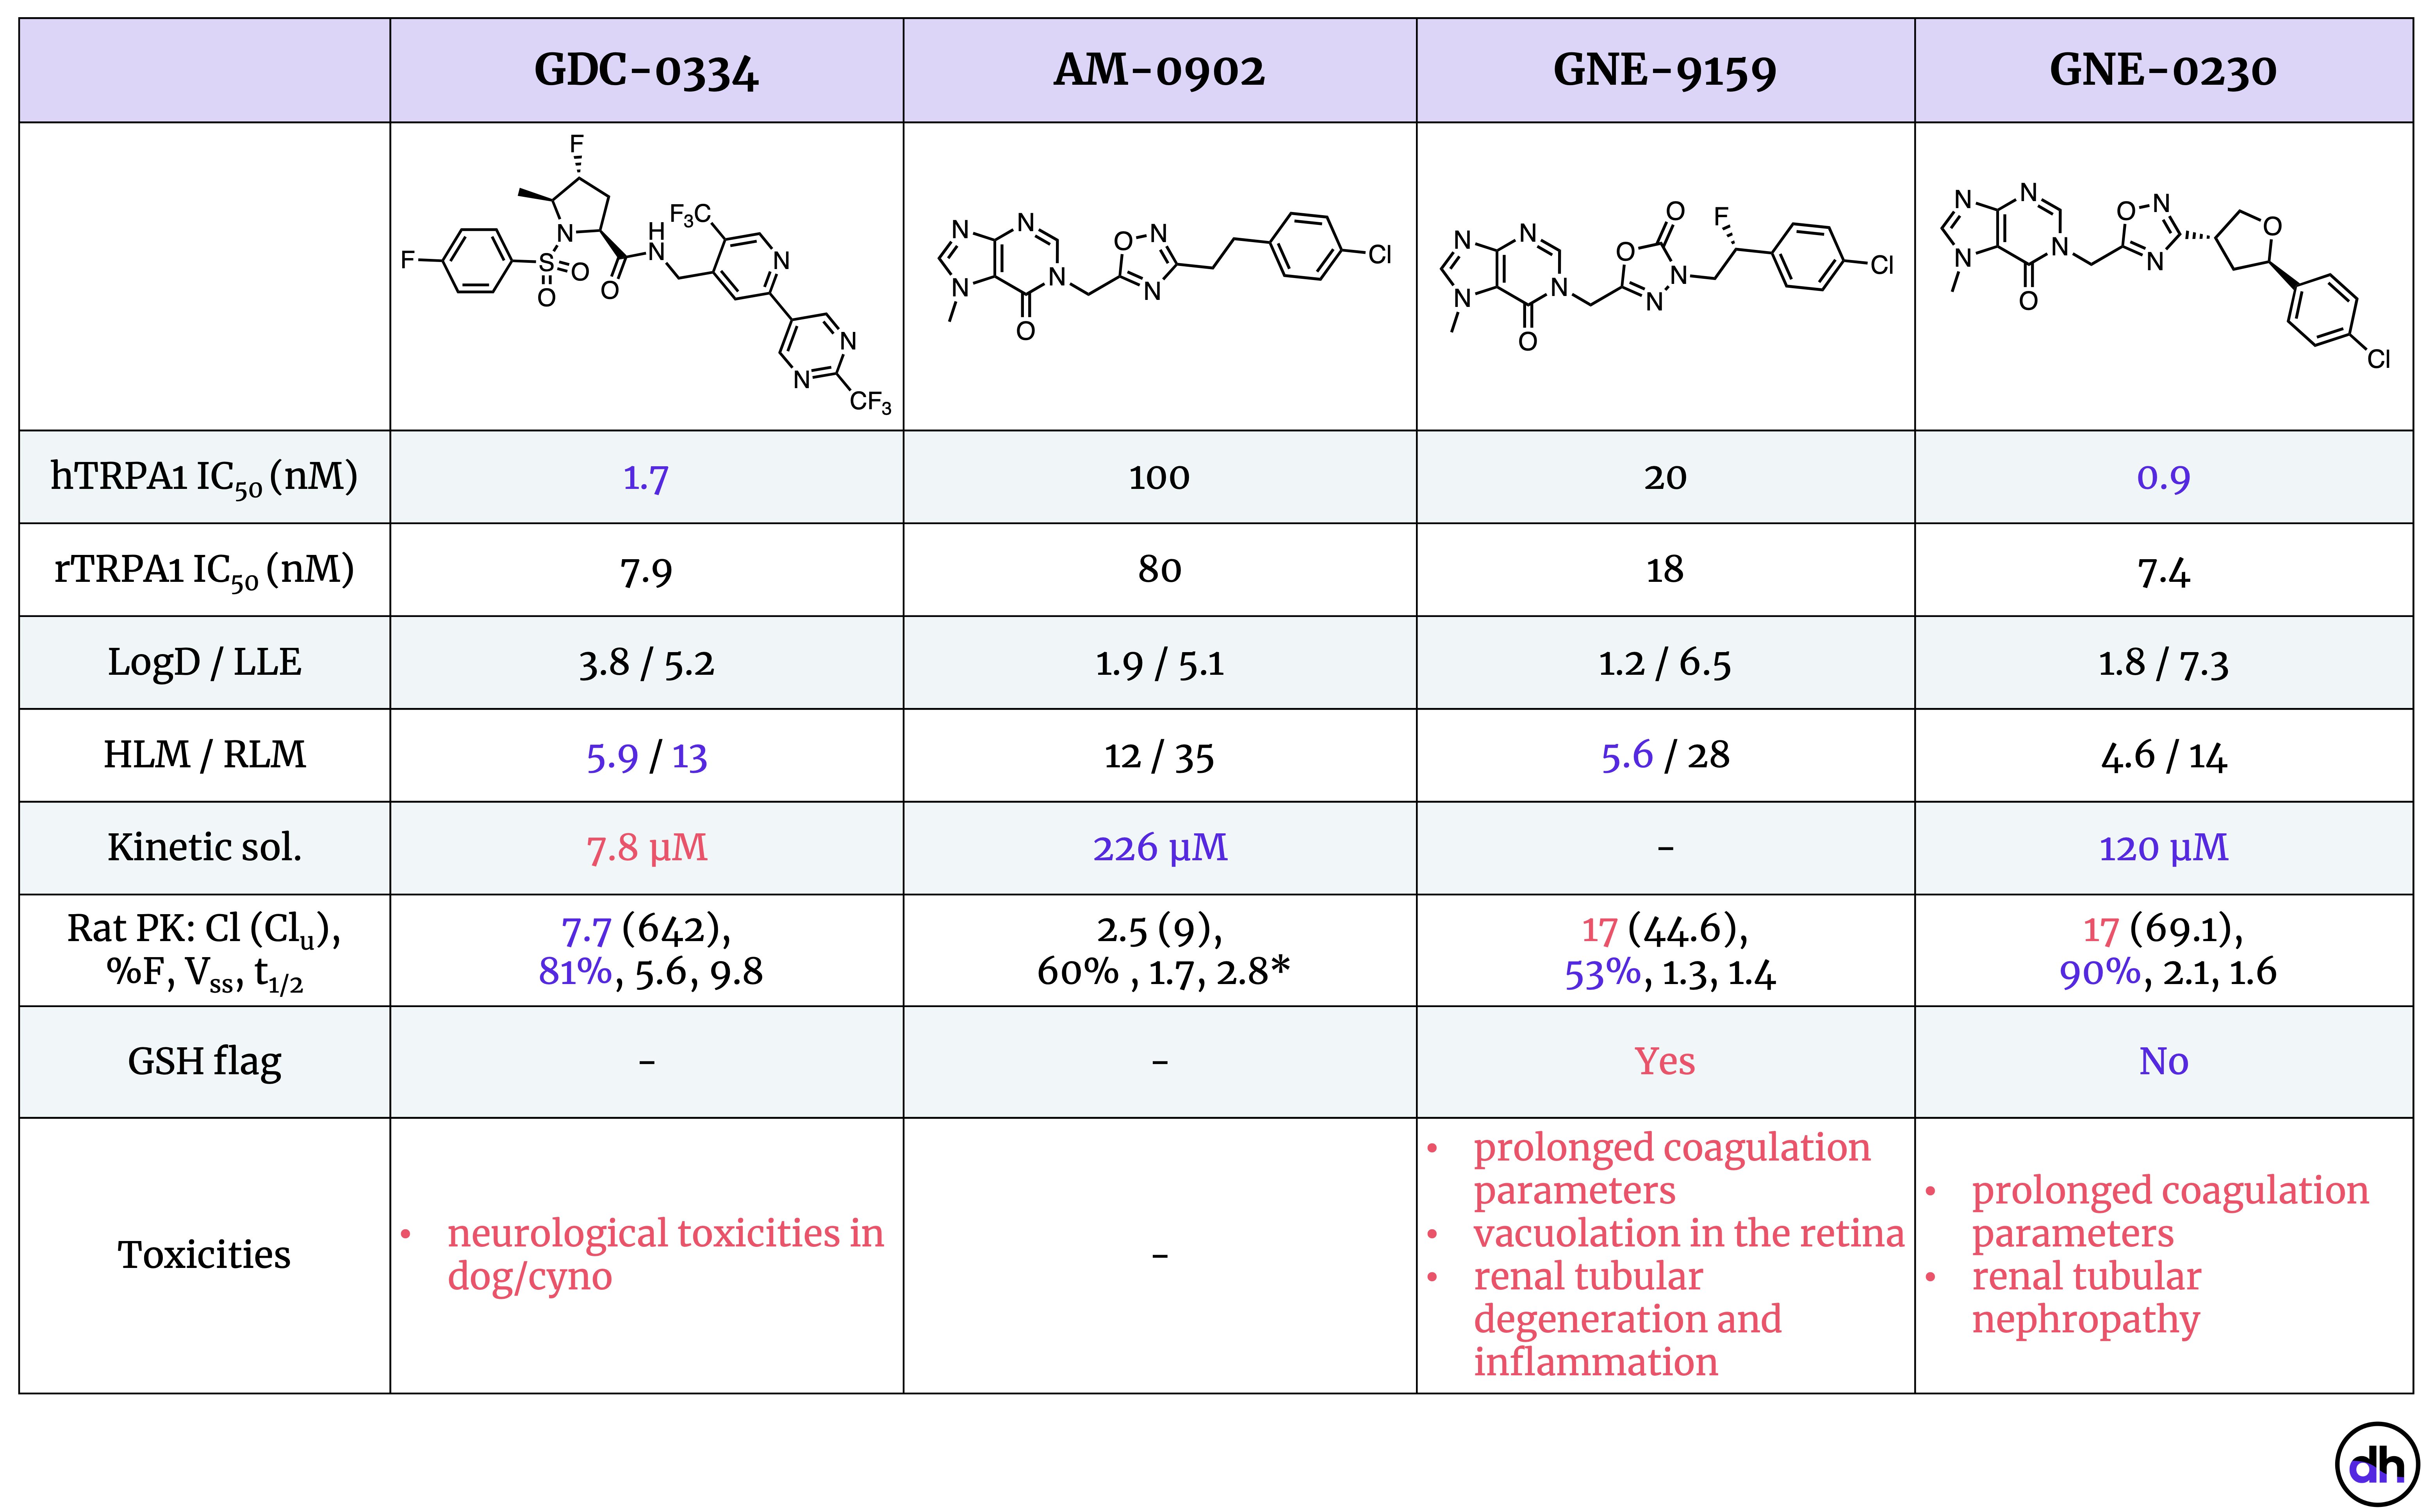 Table1. First-generation candidate GDC-0334 carried a DDI risk and neurological toxicities in higher species. GNE-0230 is significantly more potent than its starting point, but shows an unusual anti-coagulation side effect. - = not reported. * PK data for AM-0902